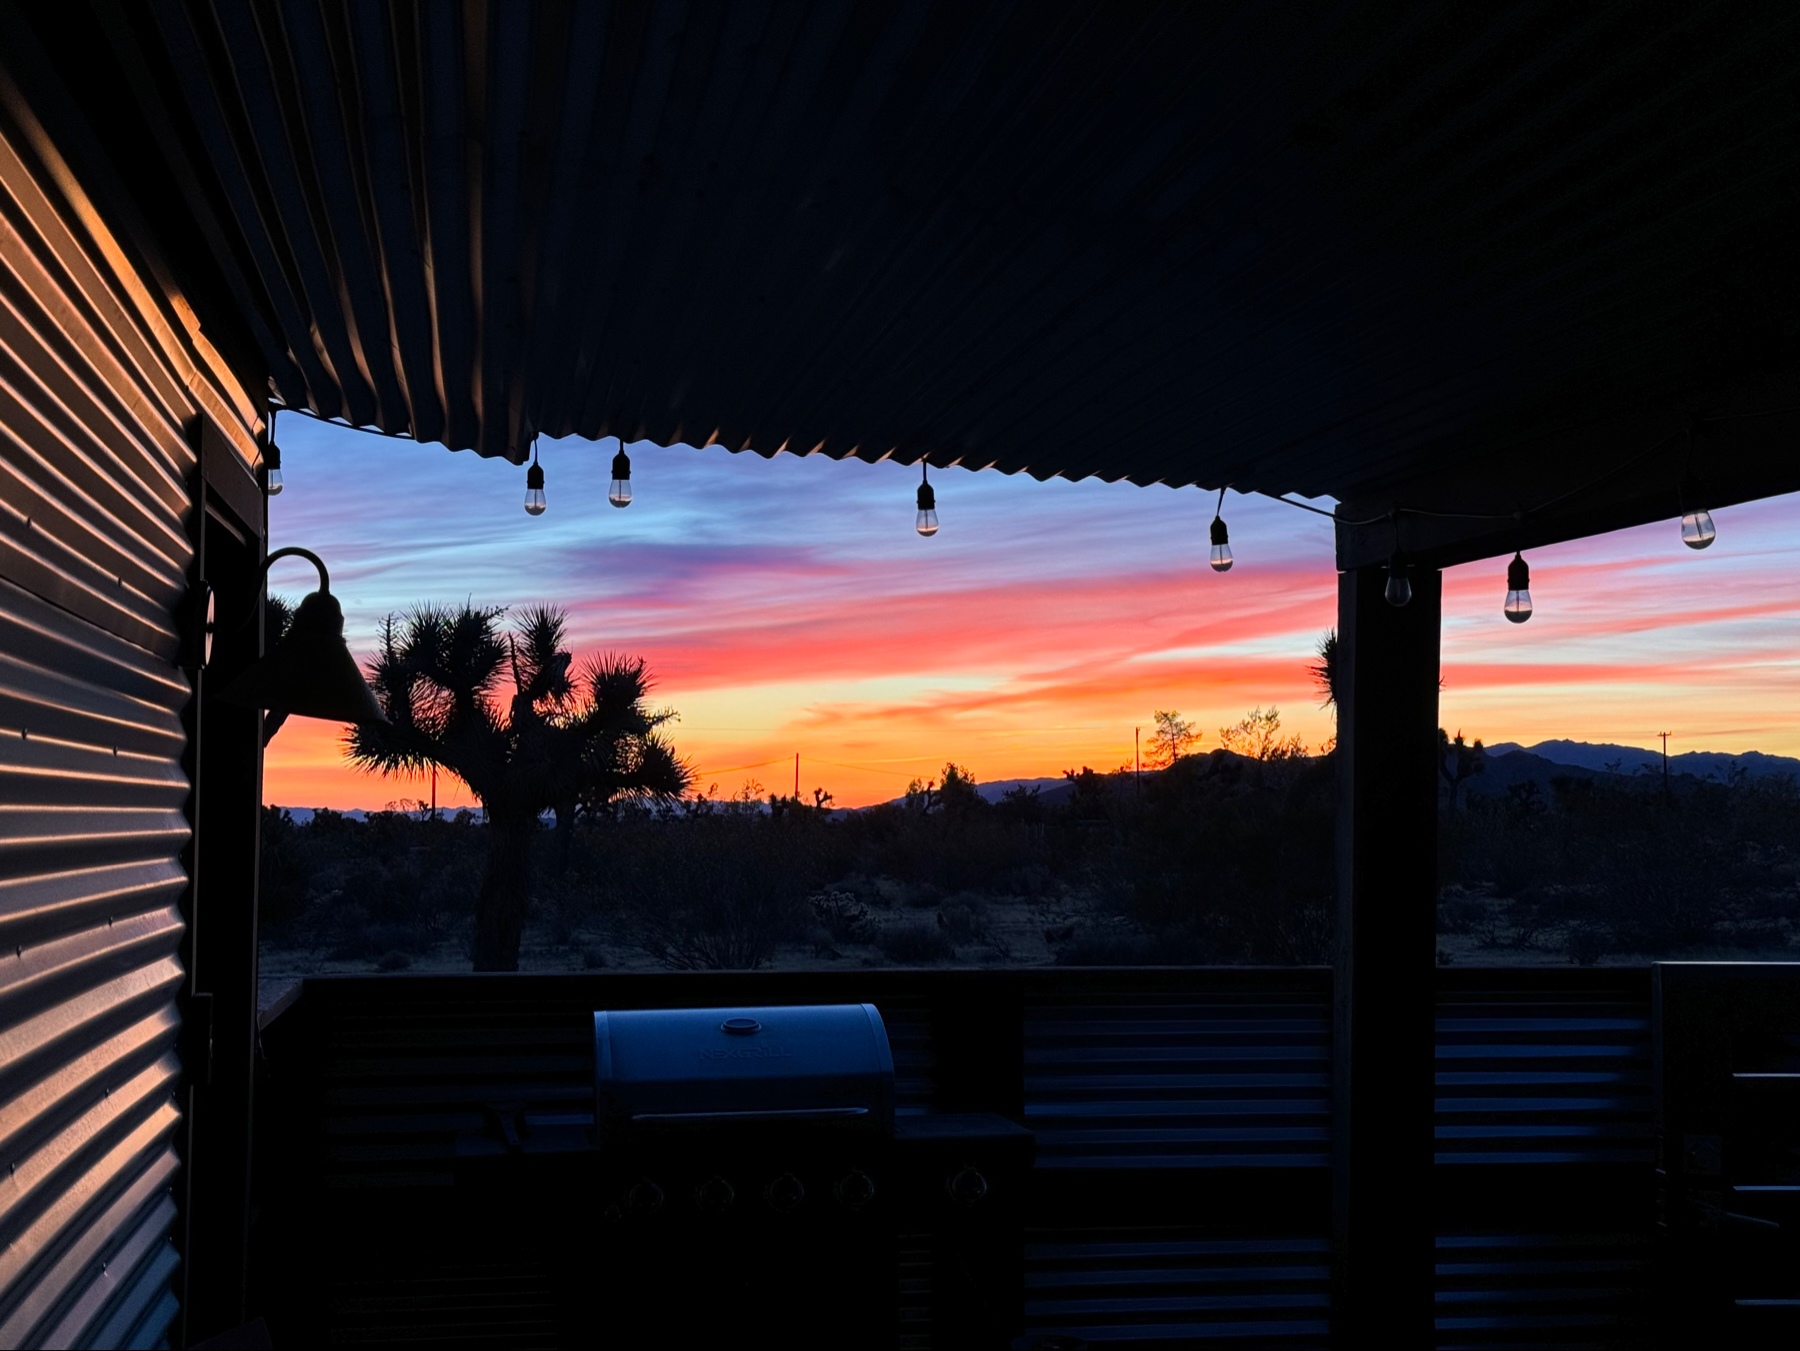 Colorful morning sunrise in the background and silhouetted porch in the foreground. In between there is a silhouette of a Joshua Tree.